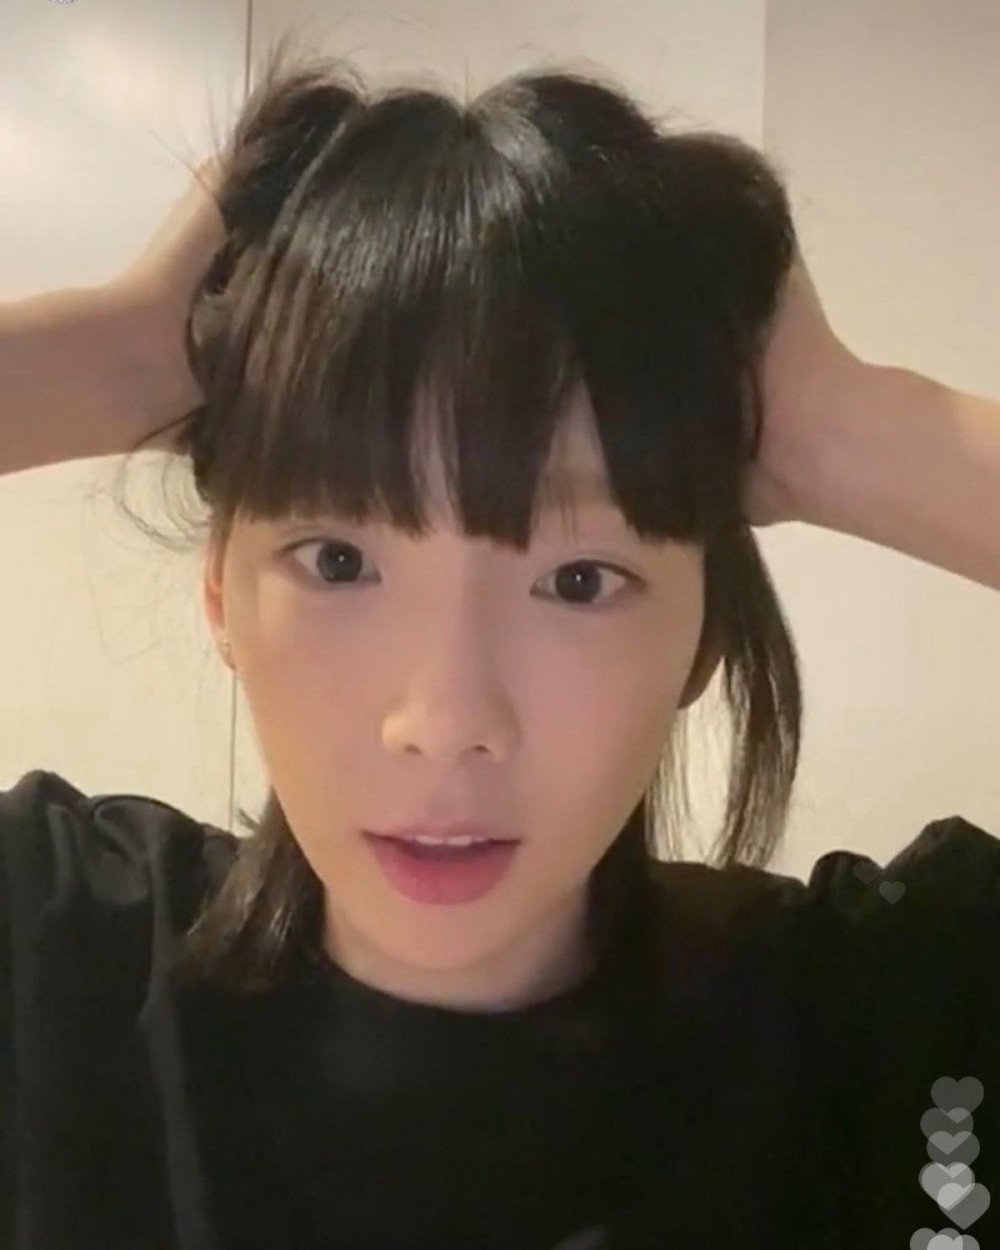 Girls' Generation's Taeyeon debuts her new short hairstyle | allkpop